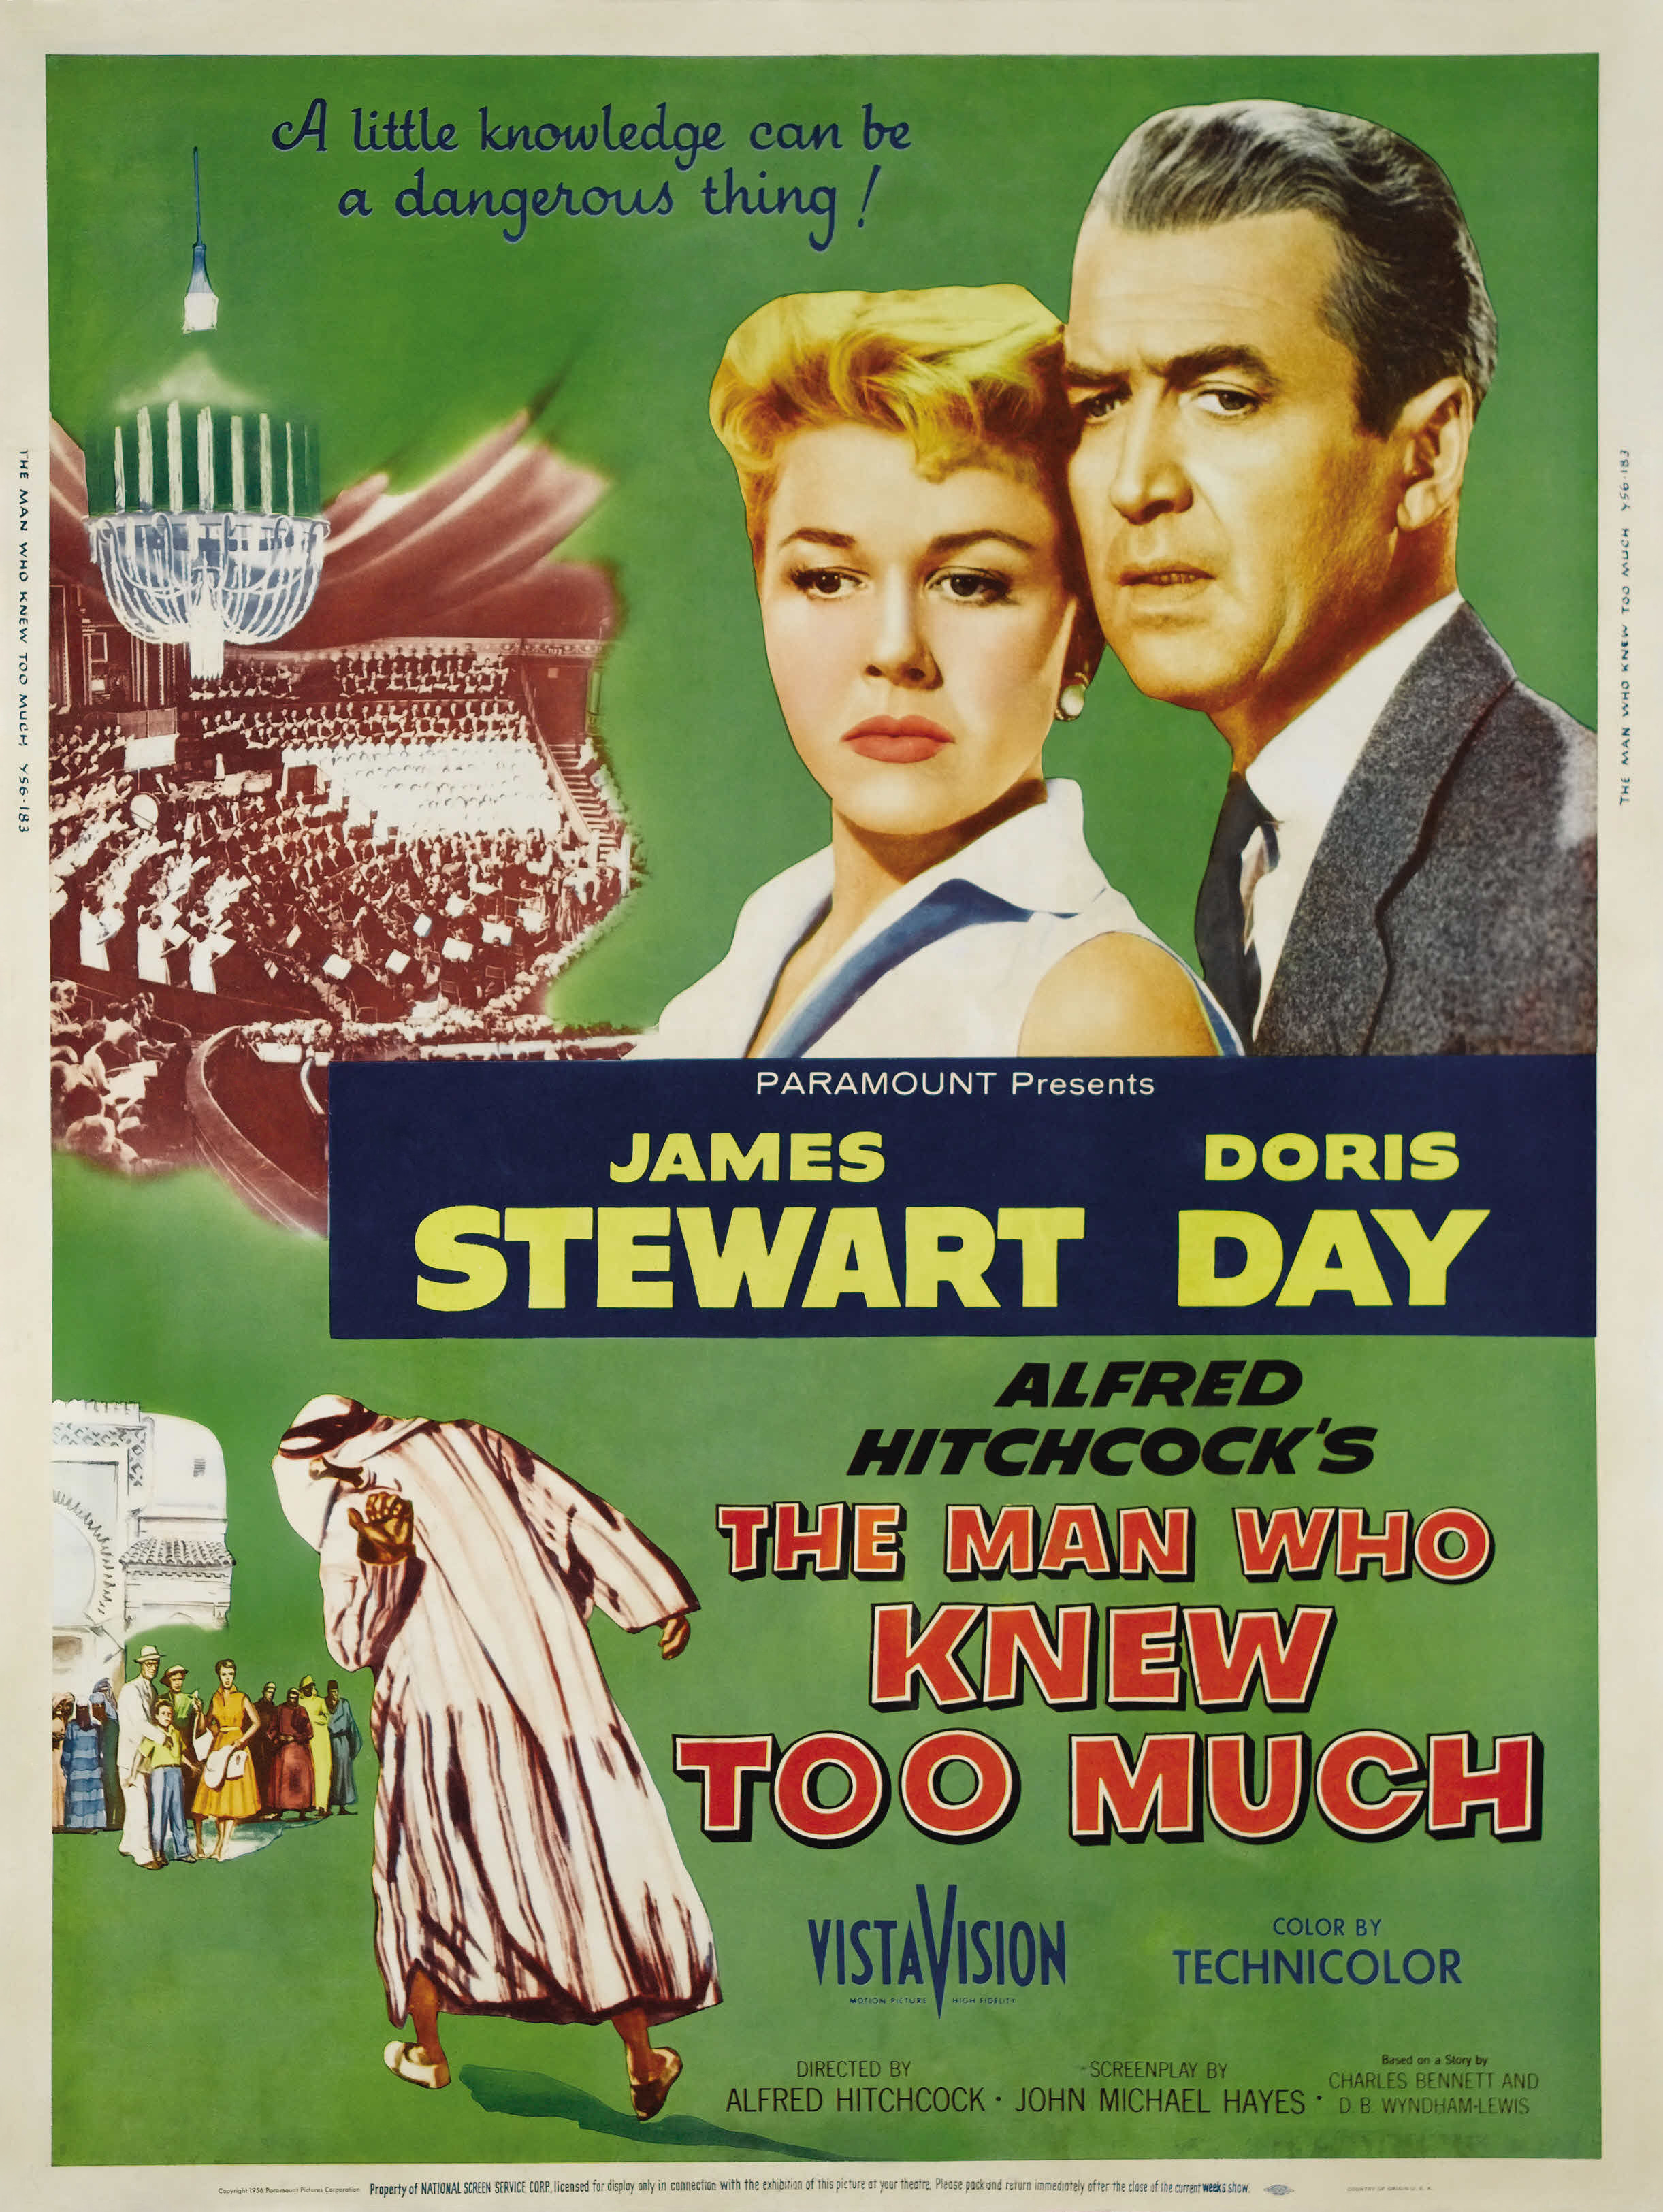 THE MAN WHO KNEW TOO MUCH (1956)